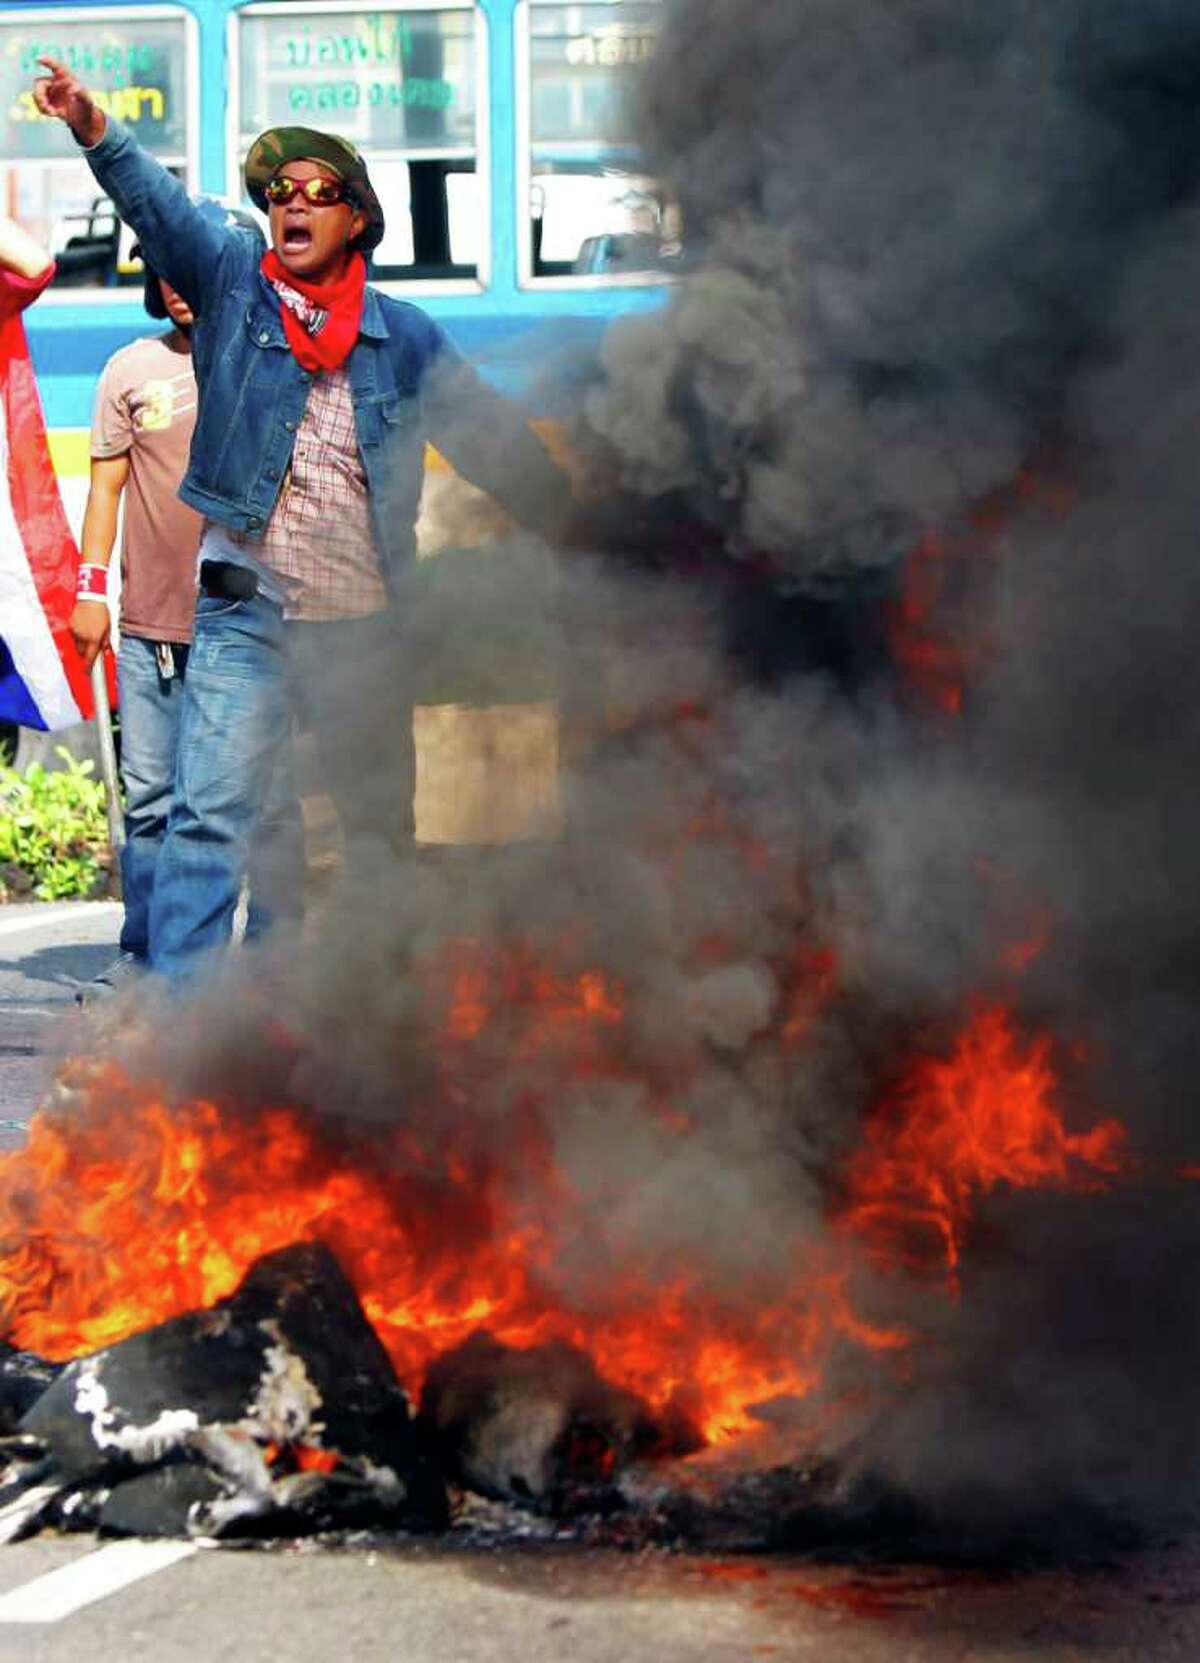 BANGKOK, THAILAND - APRIL 13: Red shirt protesters burn tyres as members of theThai military take over the streets during violent protests on April 13, 2009 in Bangkok, Thailand. Anti-government protesters clashed with the military on the streets of Thailand's capital after the government declared a state of emergency. The pro-Shinawatra demonstrators are calling for the resignation of Prime Minister Abhisit Vejjajiva and for fresh elections to be held. (Photo Paula Bronstein/Getty Images)